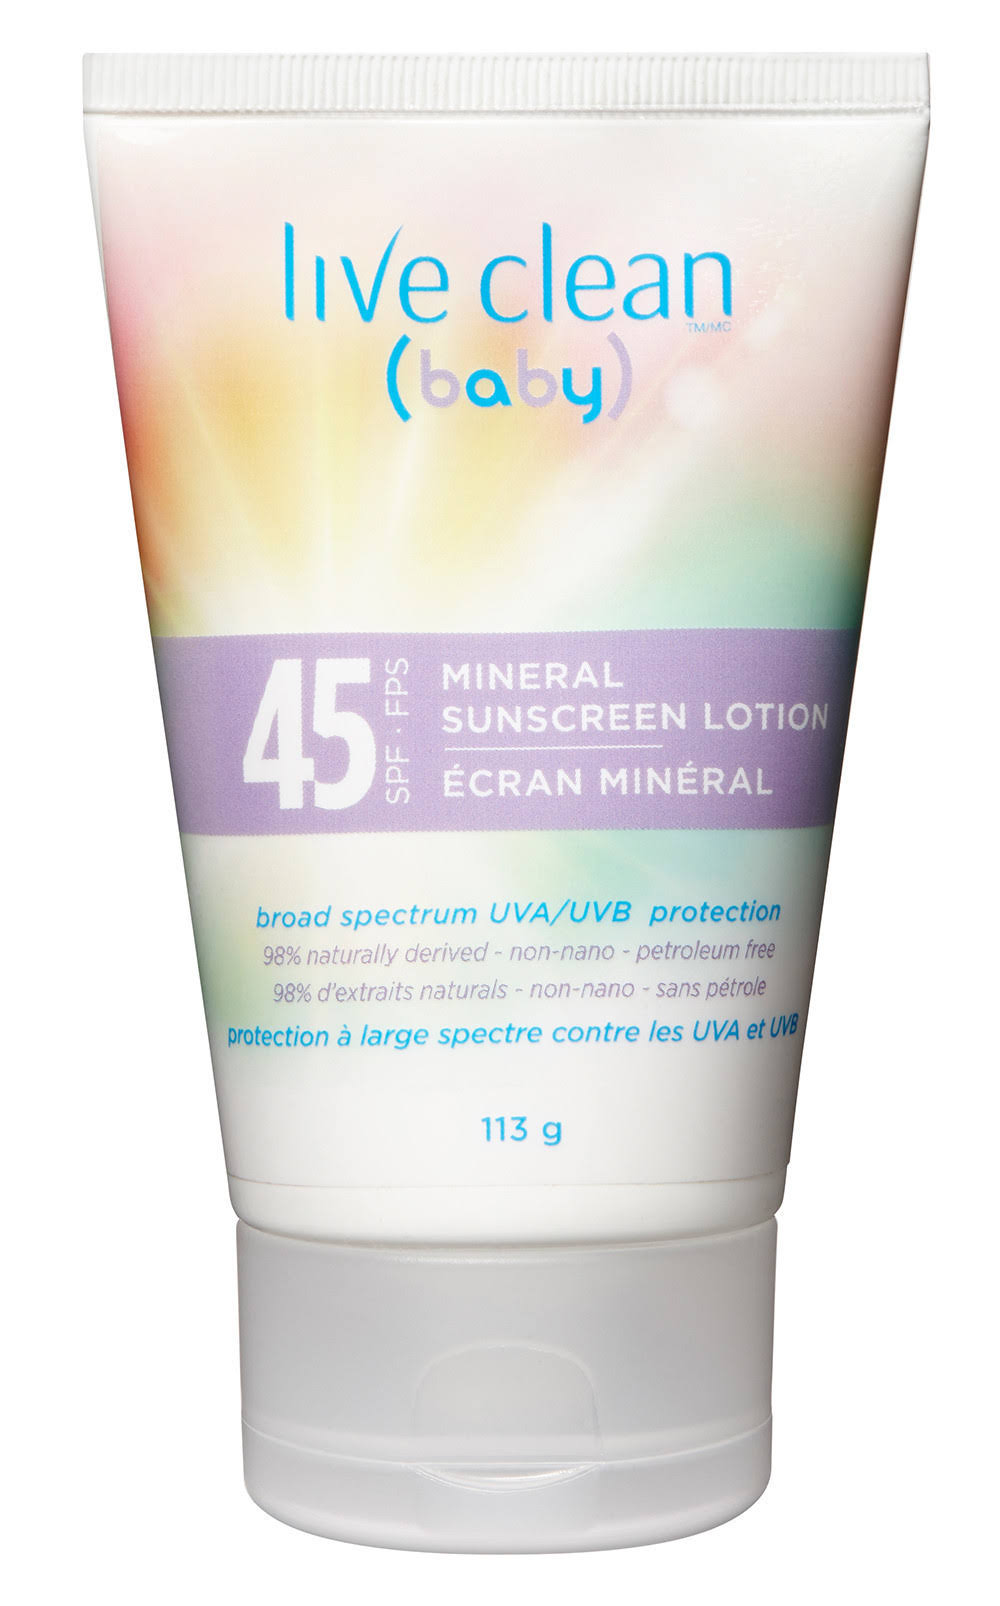 Live Clean Baby Mineral Sunscreen Lotion - 45 SPF, 113g